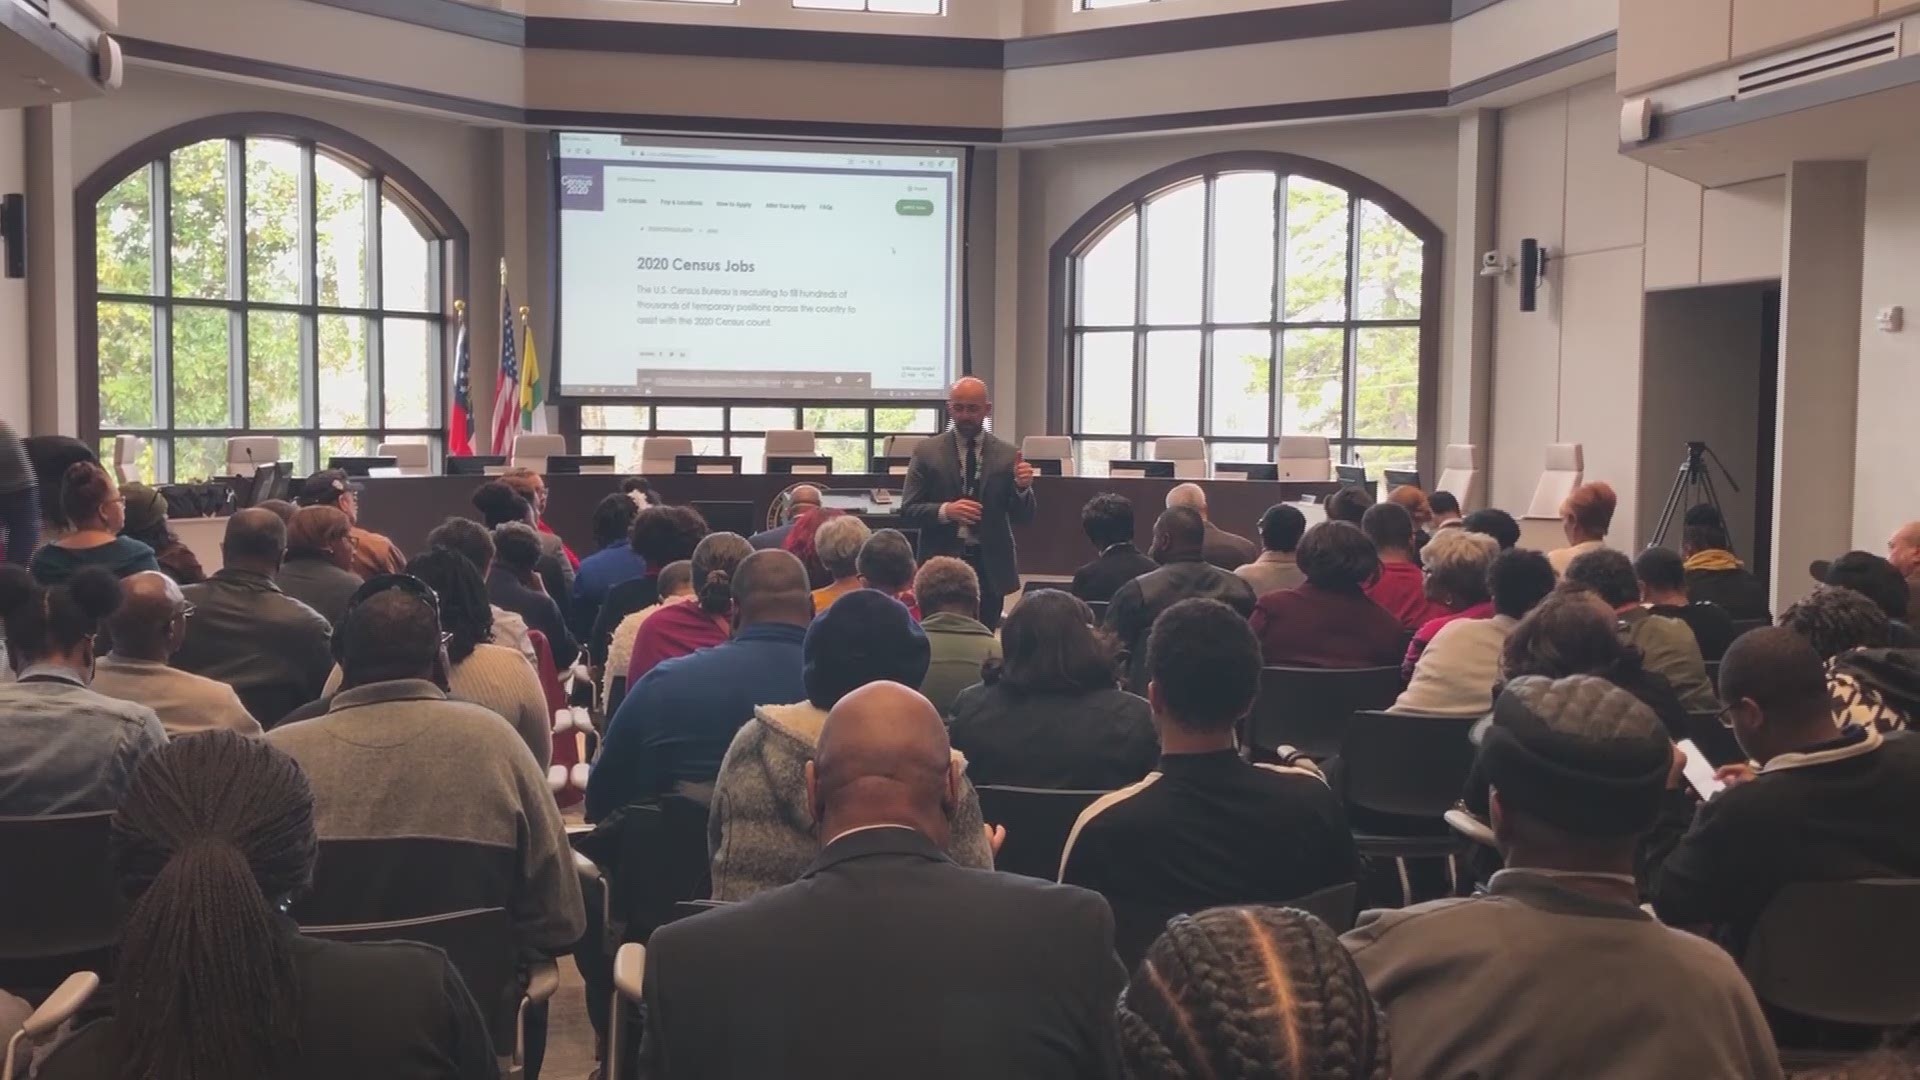 The City of East Point hosts public information session for upcoming census